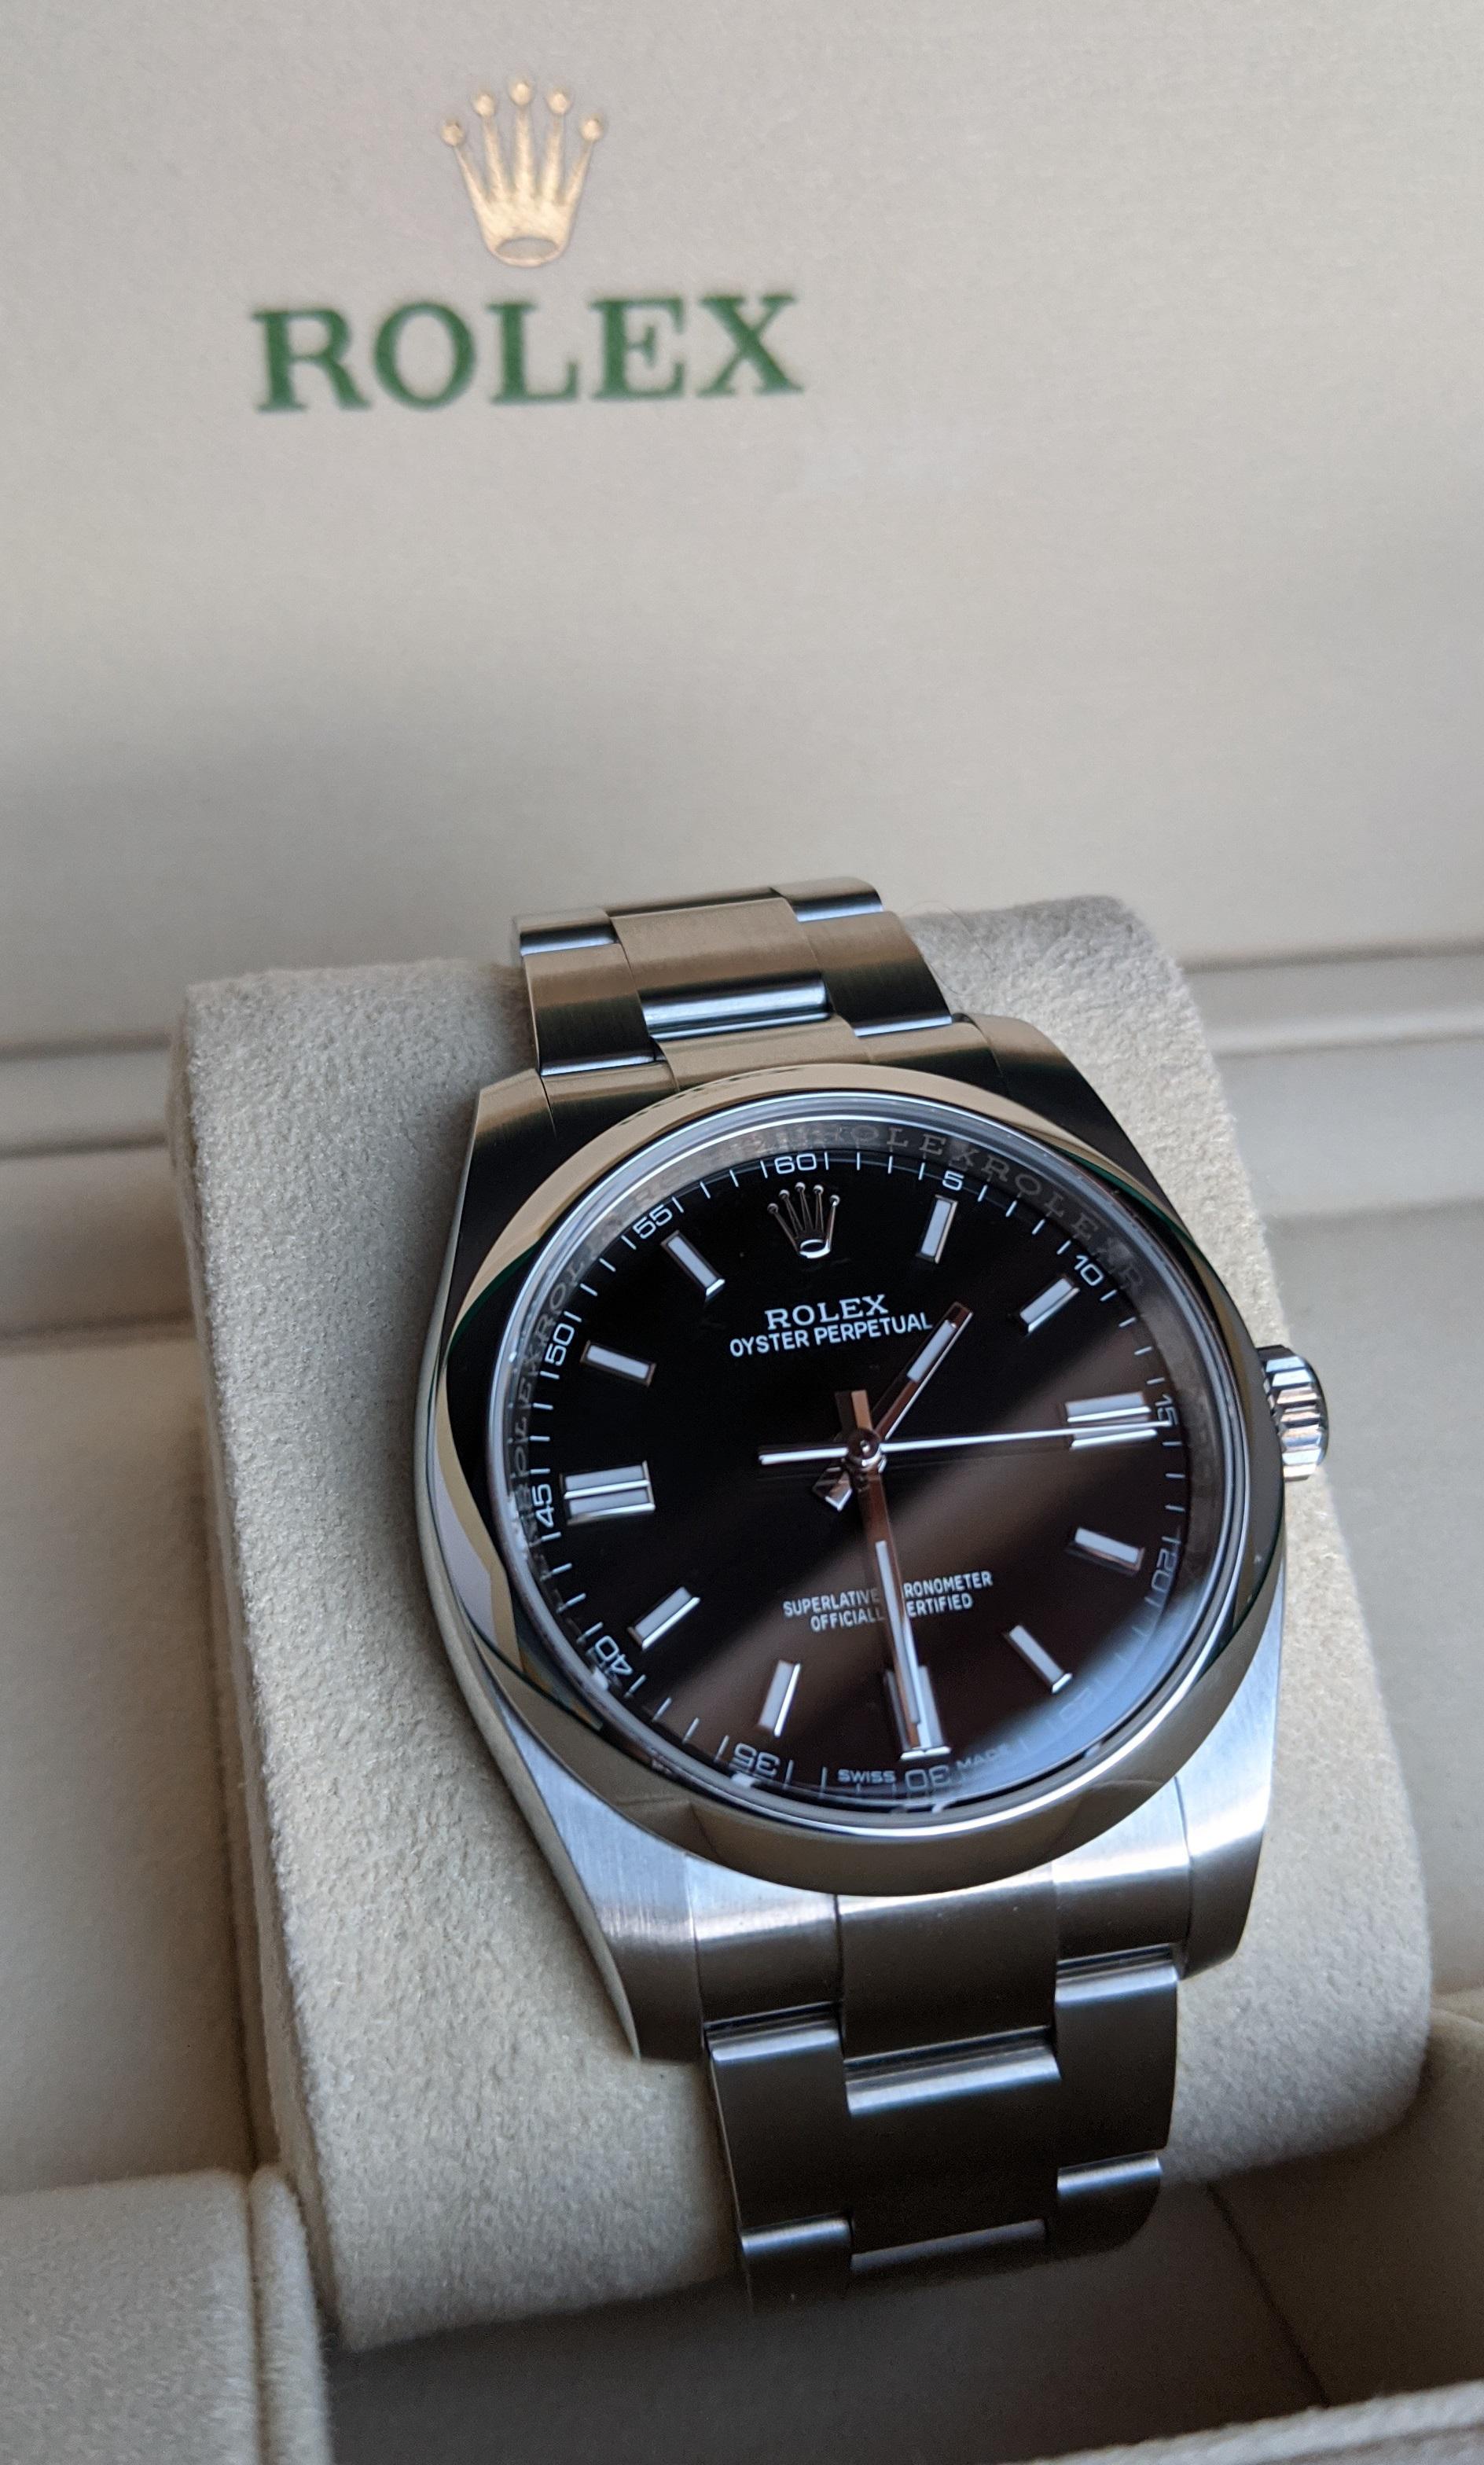 Rolex Oyster Perpetual 36 (116000) - As New and Full Set